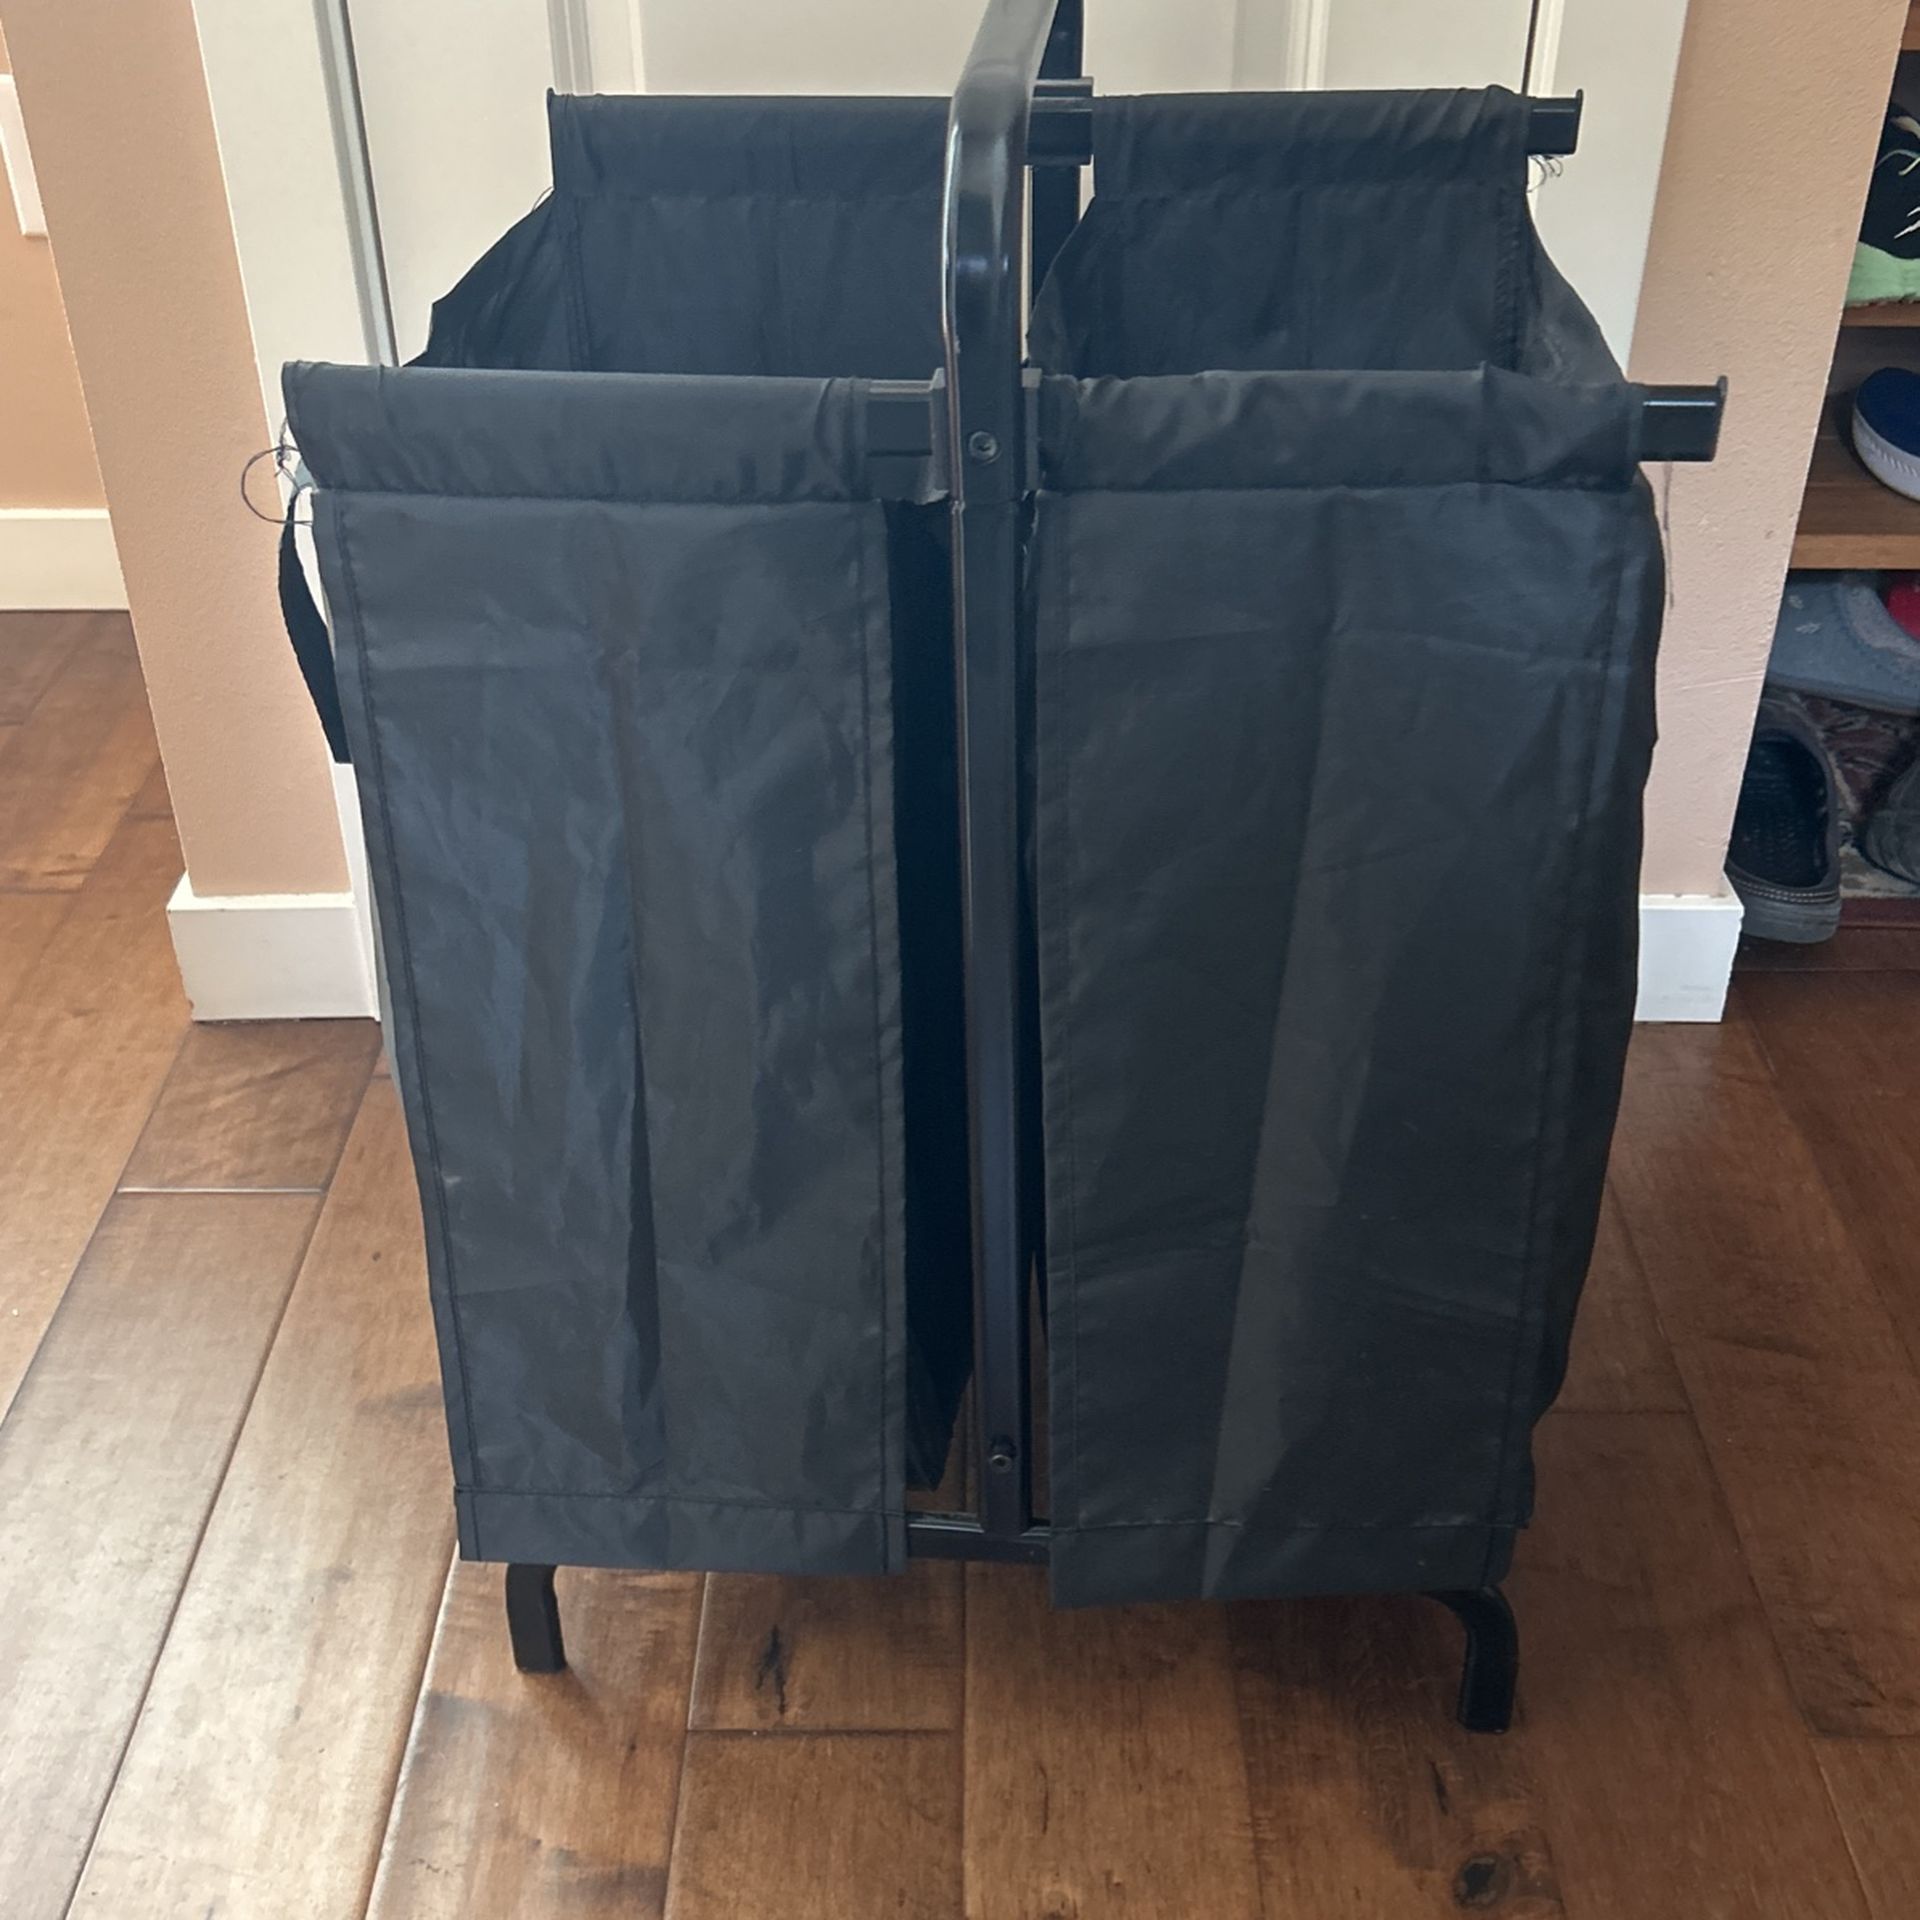 Laundry Sorter /Bag 2 Sections $10